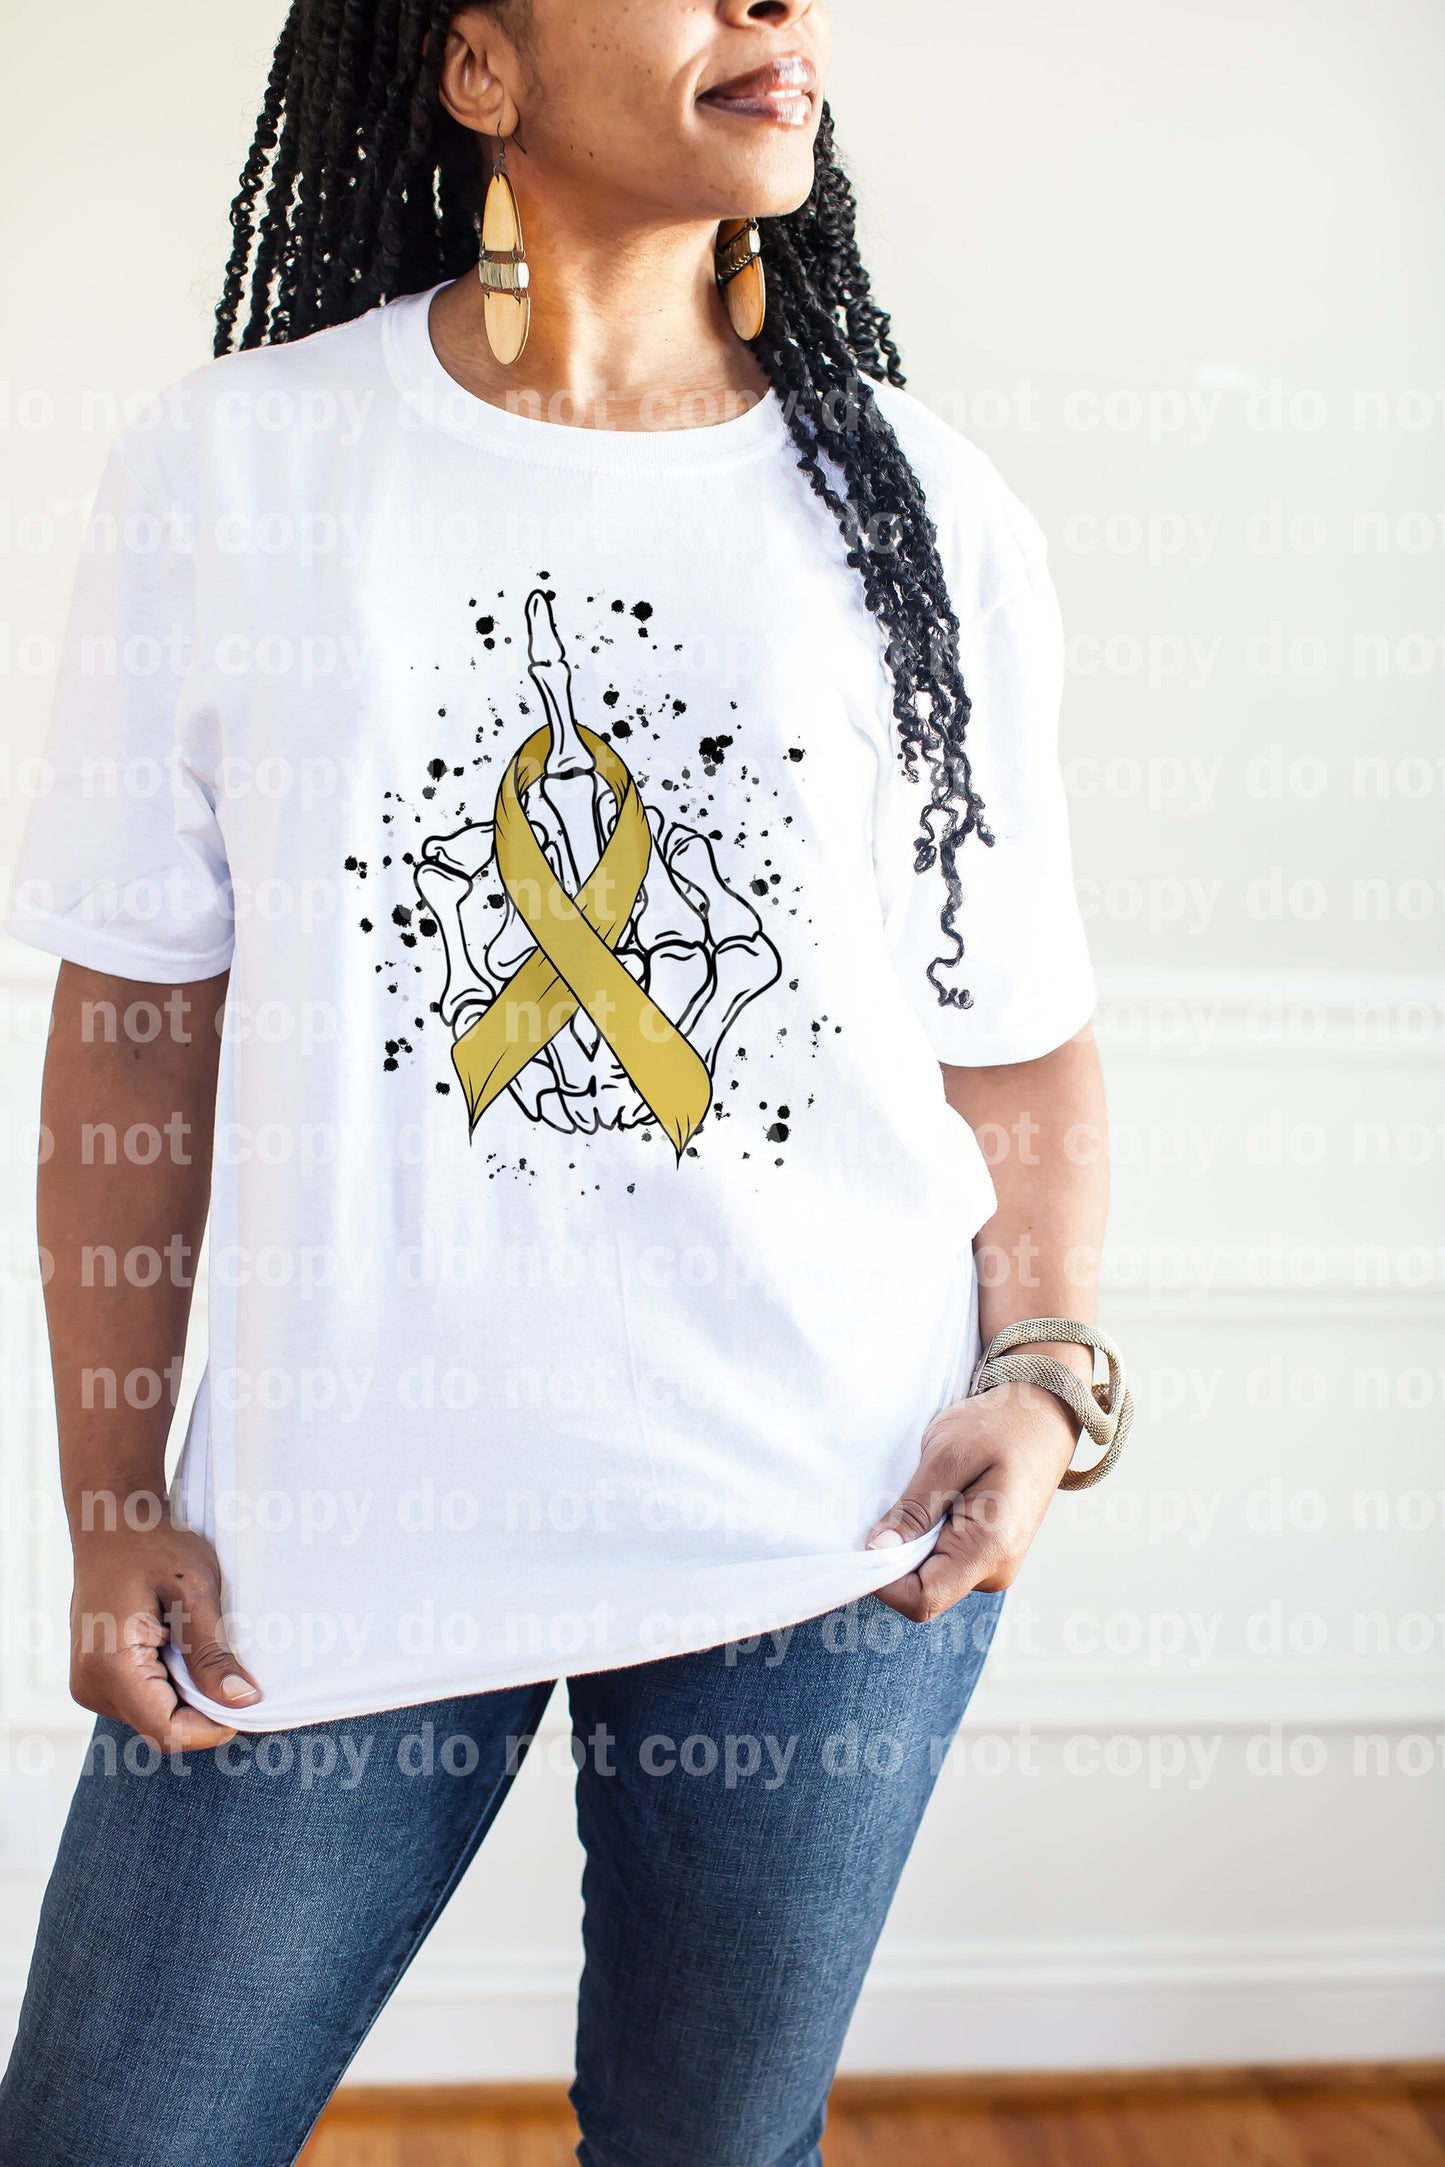 Gold Cancer Ribbon Dream Print or Sublimation Print